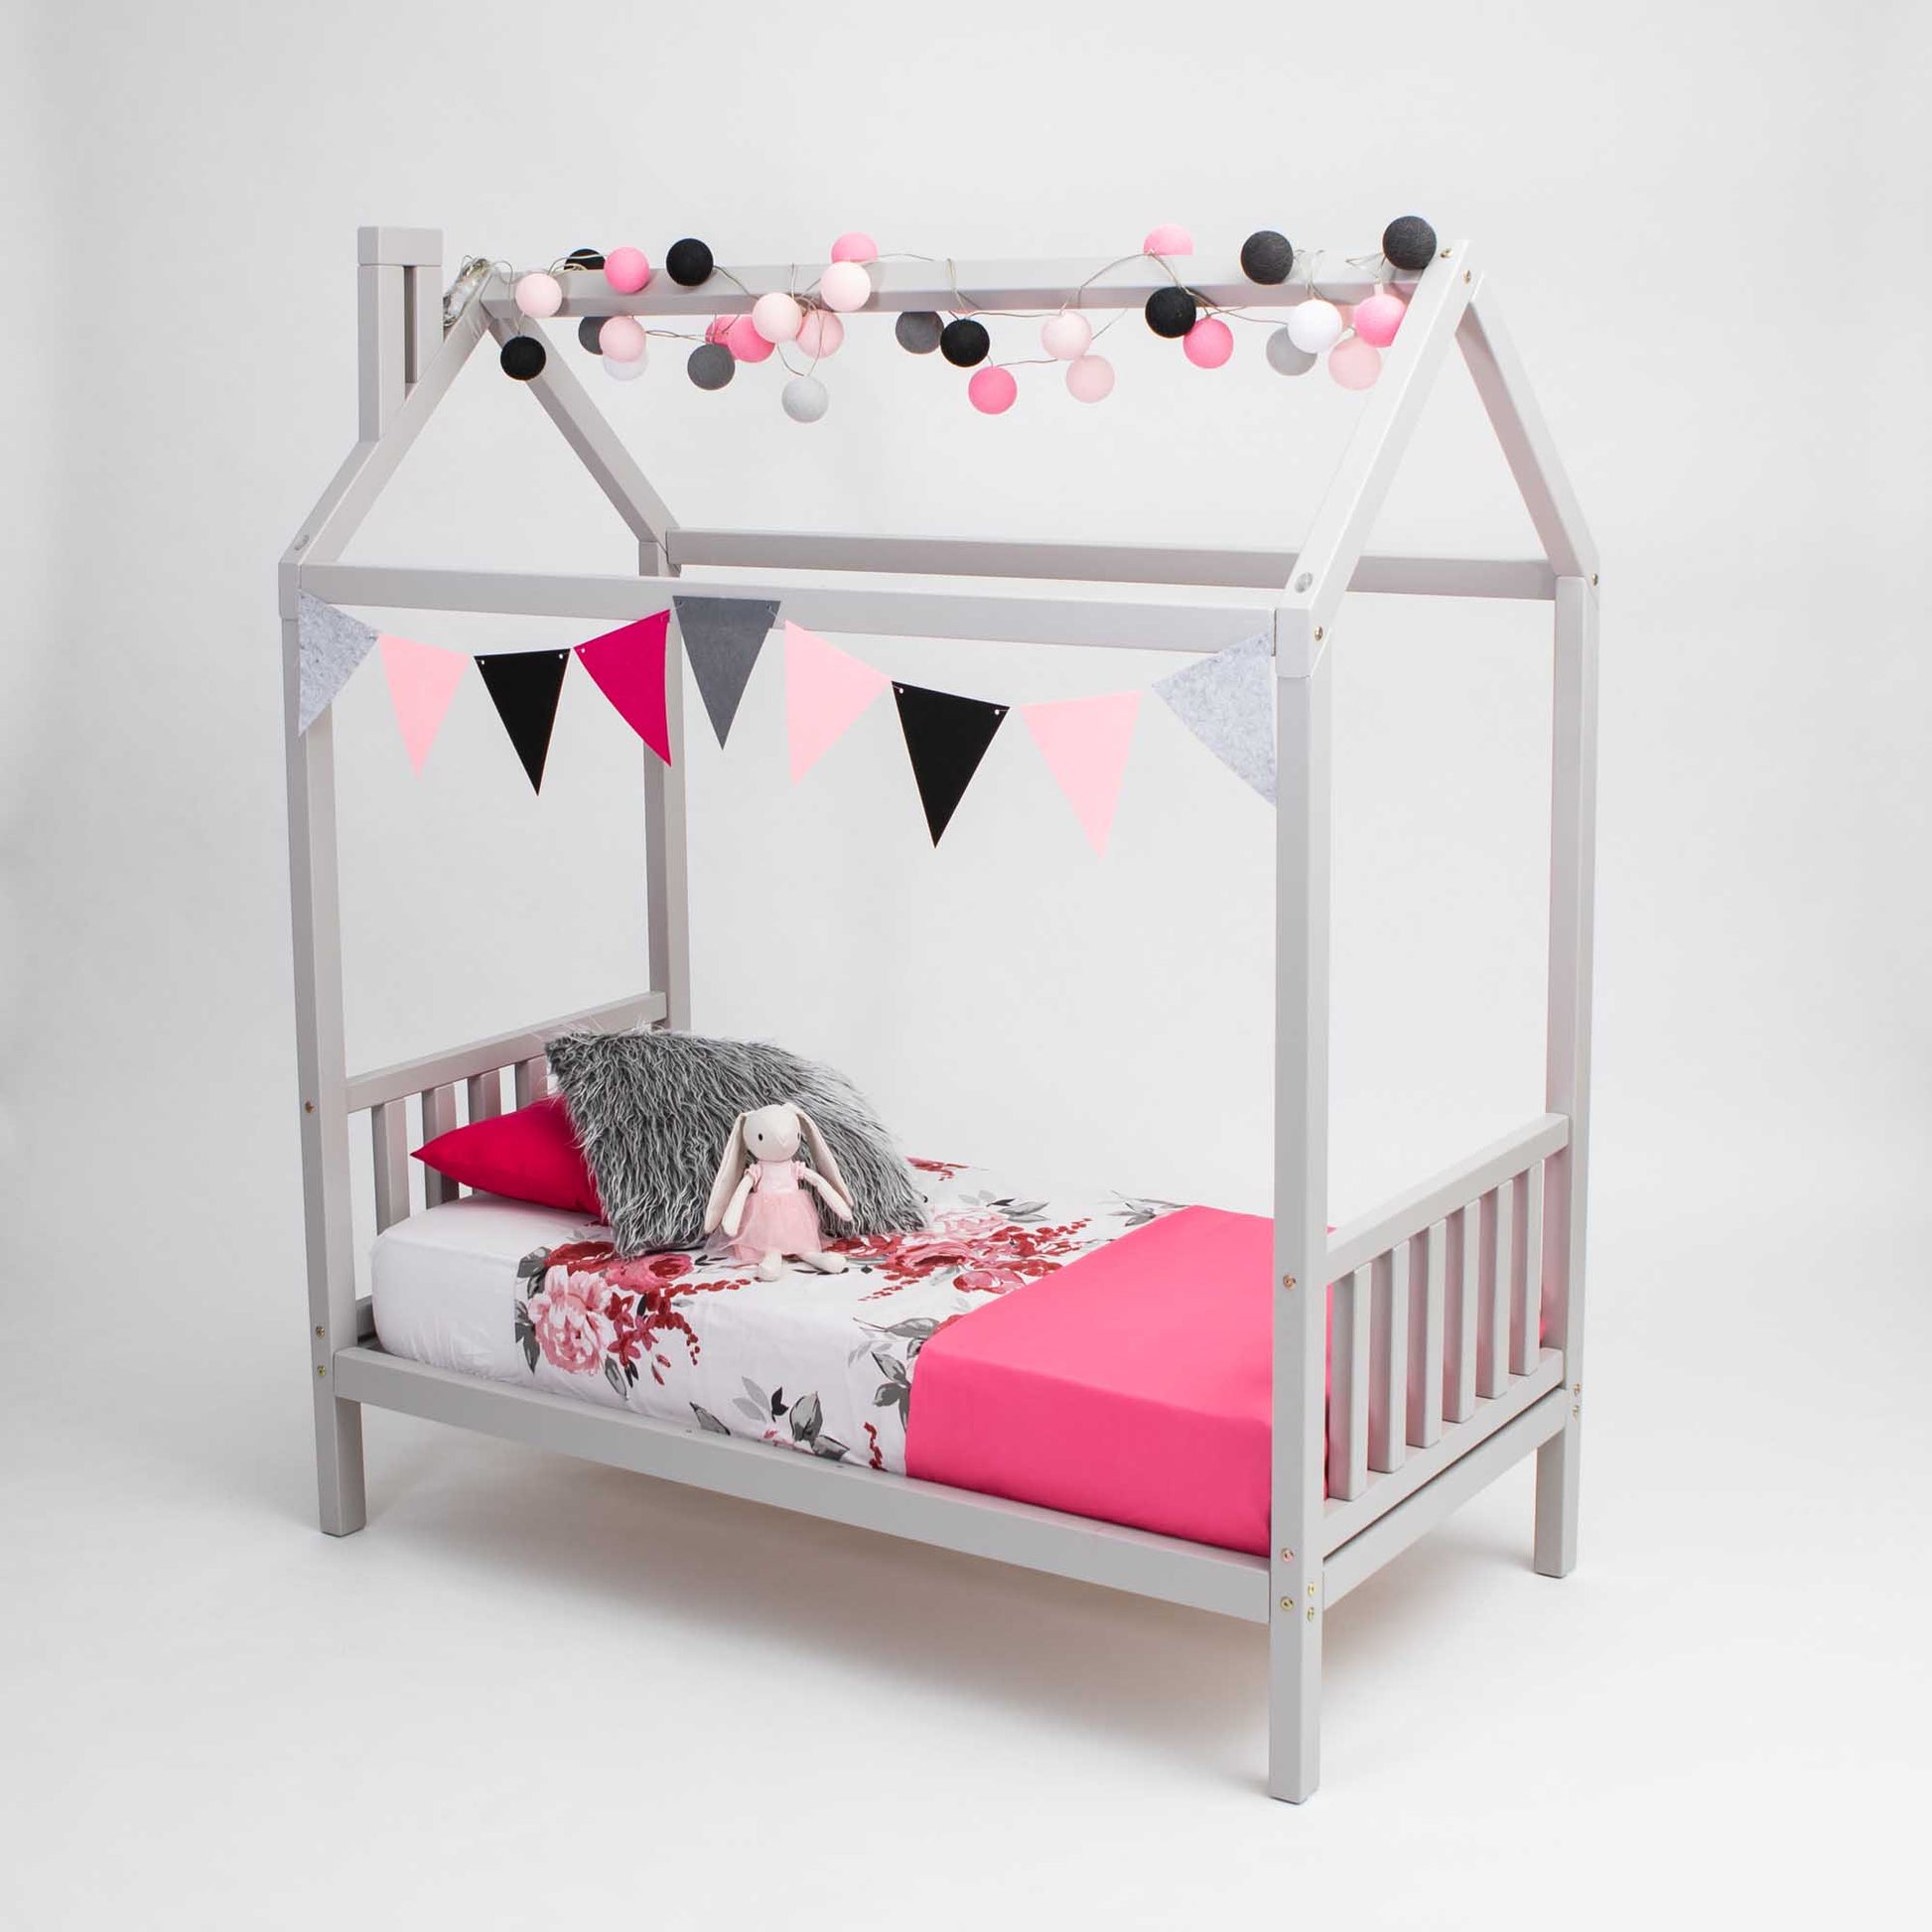 A girl's toddler house bed on legs with a pink and grey canopy and bunting.